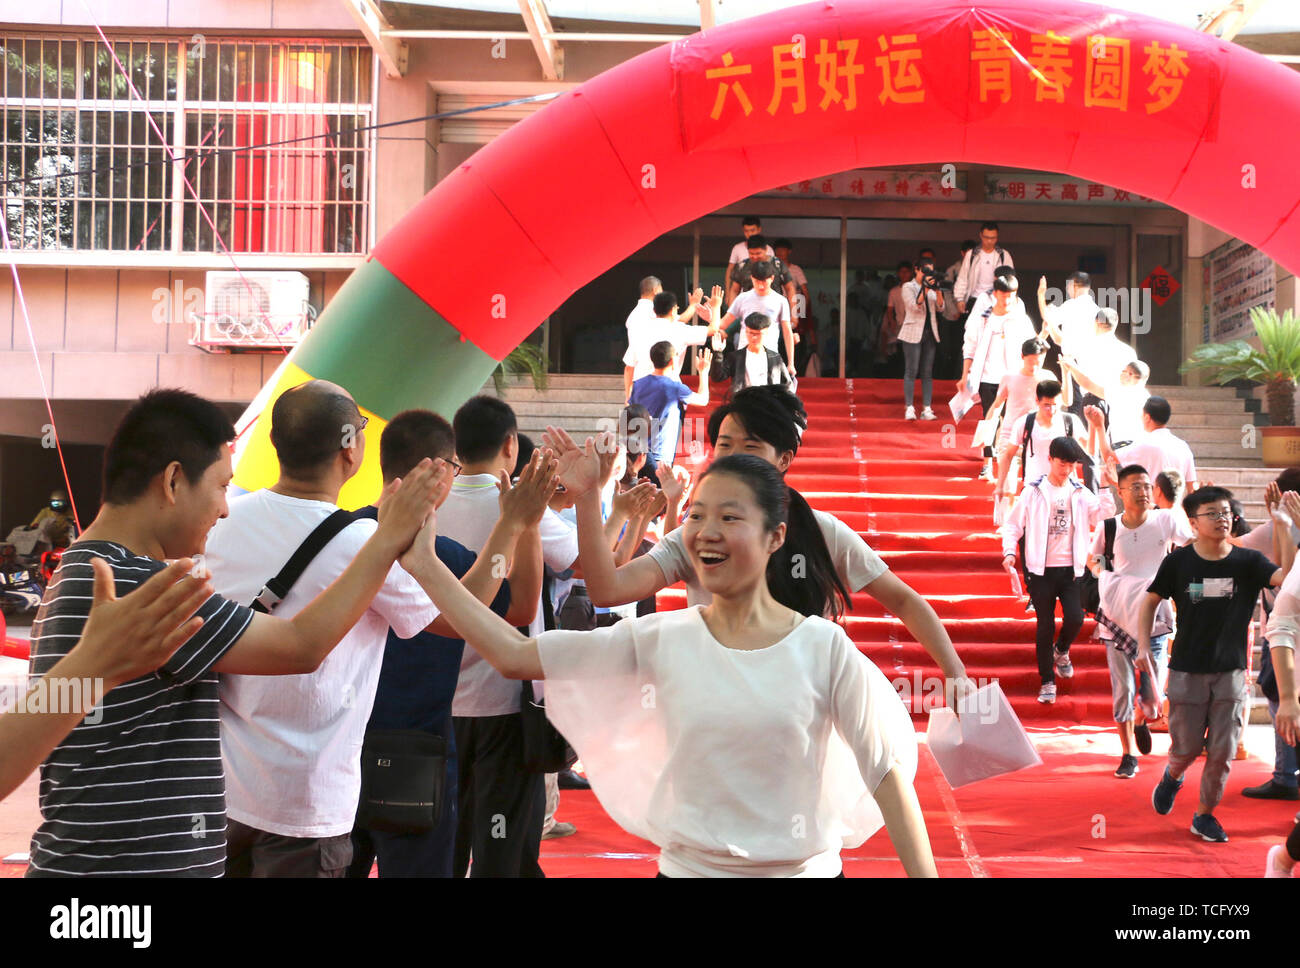 Jining, China's Shandong Province. 7th June, 2019. Teachers cheer for examinees at an exam venue at the Experimental Middle School in Zoucheng City, east China's Shandong Province, June 7, 2019. China's national college entrance examination, or Gaokao, started Friday this year. Credit: Wang Qisheng/Xinhua/Alamy Live News Stock Photo